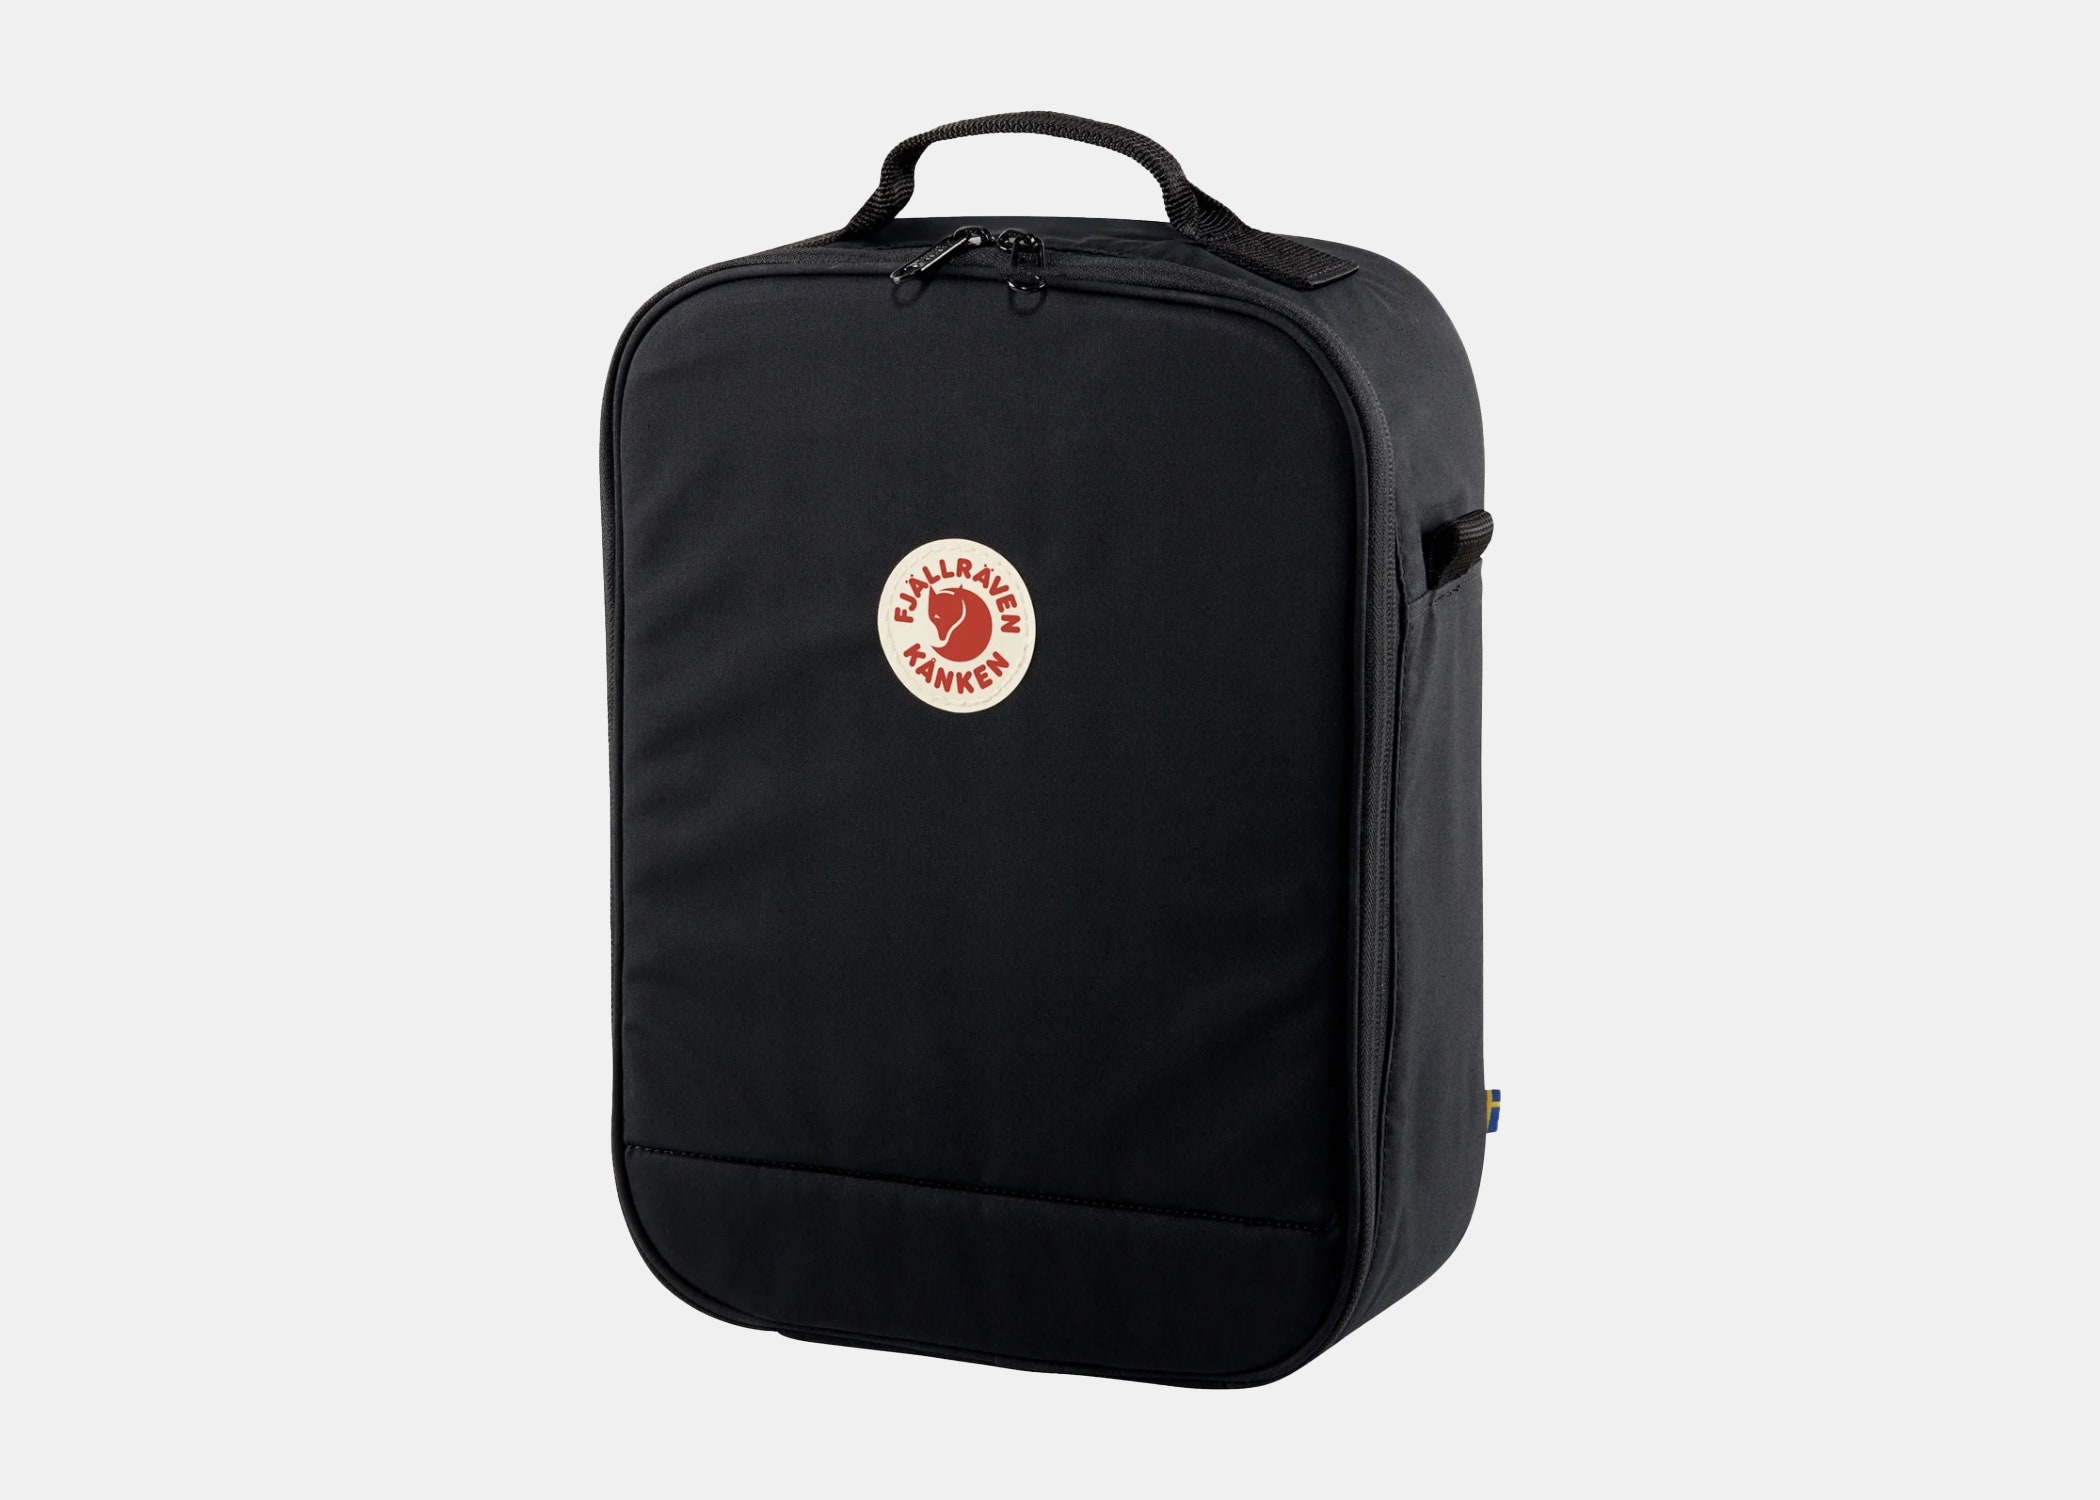 <p><strong>Best for flexibility</strong></p> <p>This accessory from Fjällräven can transform any bag or backpack into one for cameras, but is specifically designed to click into the brand’s Kånken backpack dimensions. It comes in two sizes, small and medium, depending on how much gear you have. It’s padded with foam compartments that protect cameras, lenses, and other gear like microphones or lights.</p> <p><strong>Noteworthy features:</strong> Water-resistant, Velcro for flexibility</p> $103, Amazon. <a href="https://www.amazon.com/Fjallraven-Unisex-Adult-Luggage-K%C3%A5nken-Insert/dp/B07D54GSHW?">Get it now!</a><p>Sign up to receive the latest news, expert tips, and inspiration on all things travel</p><a href="https://www.cntraveler.com/newsletter/the-daily?sourceCode=msnsend">Inspire Me</a>